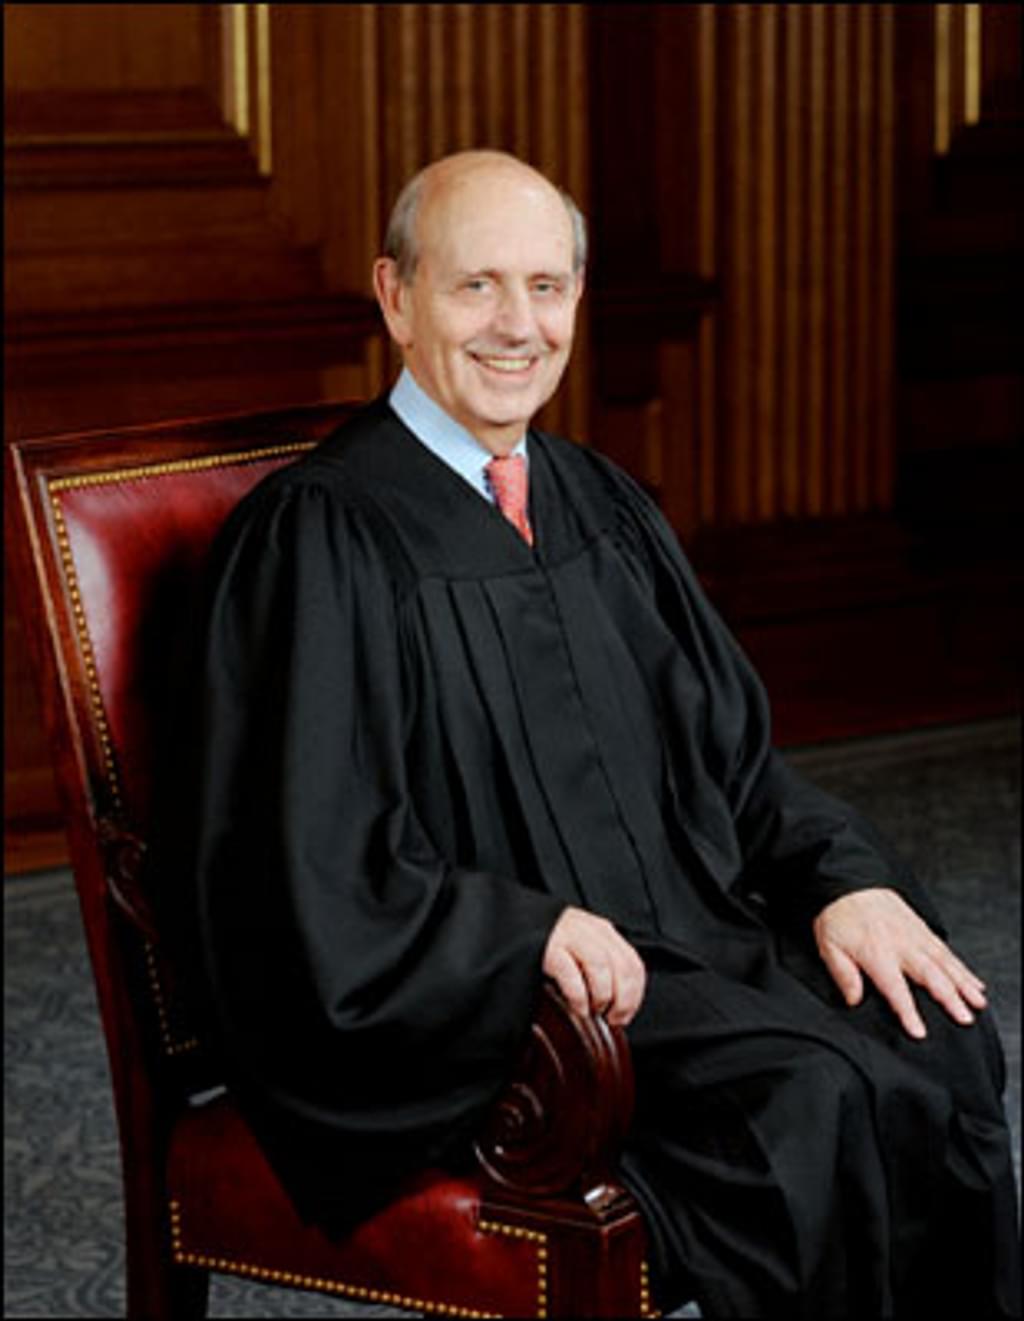 As Supreme Court Denies Stay of Execution, Justice Breyer Urges Consideration of Death Row Conditions